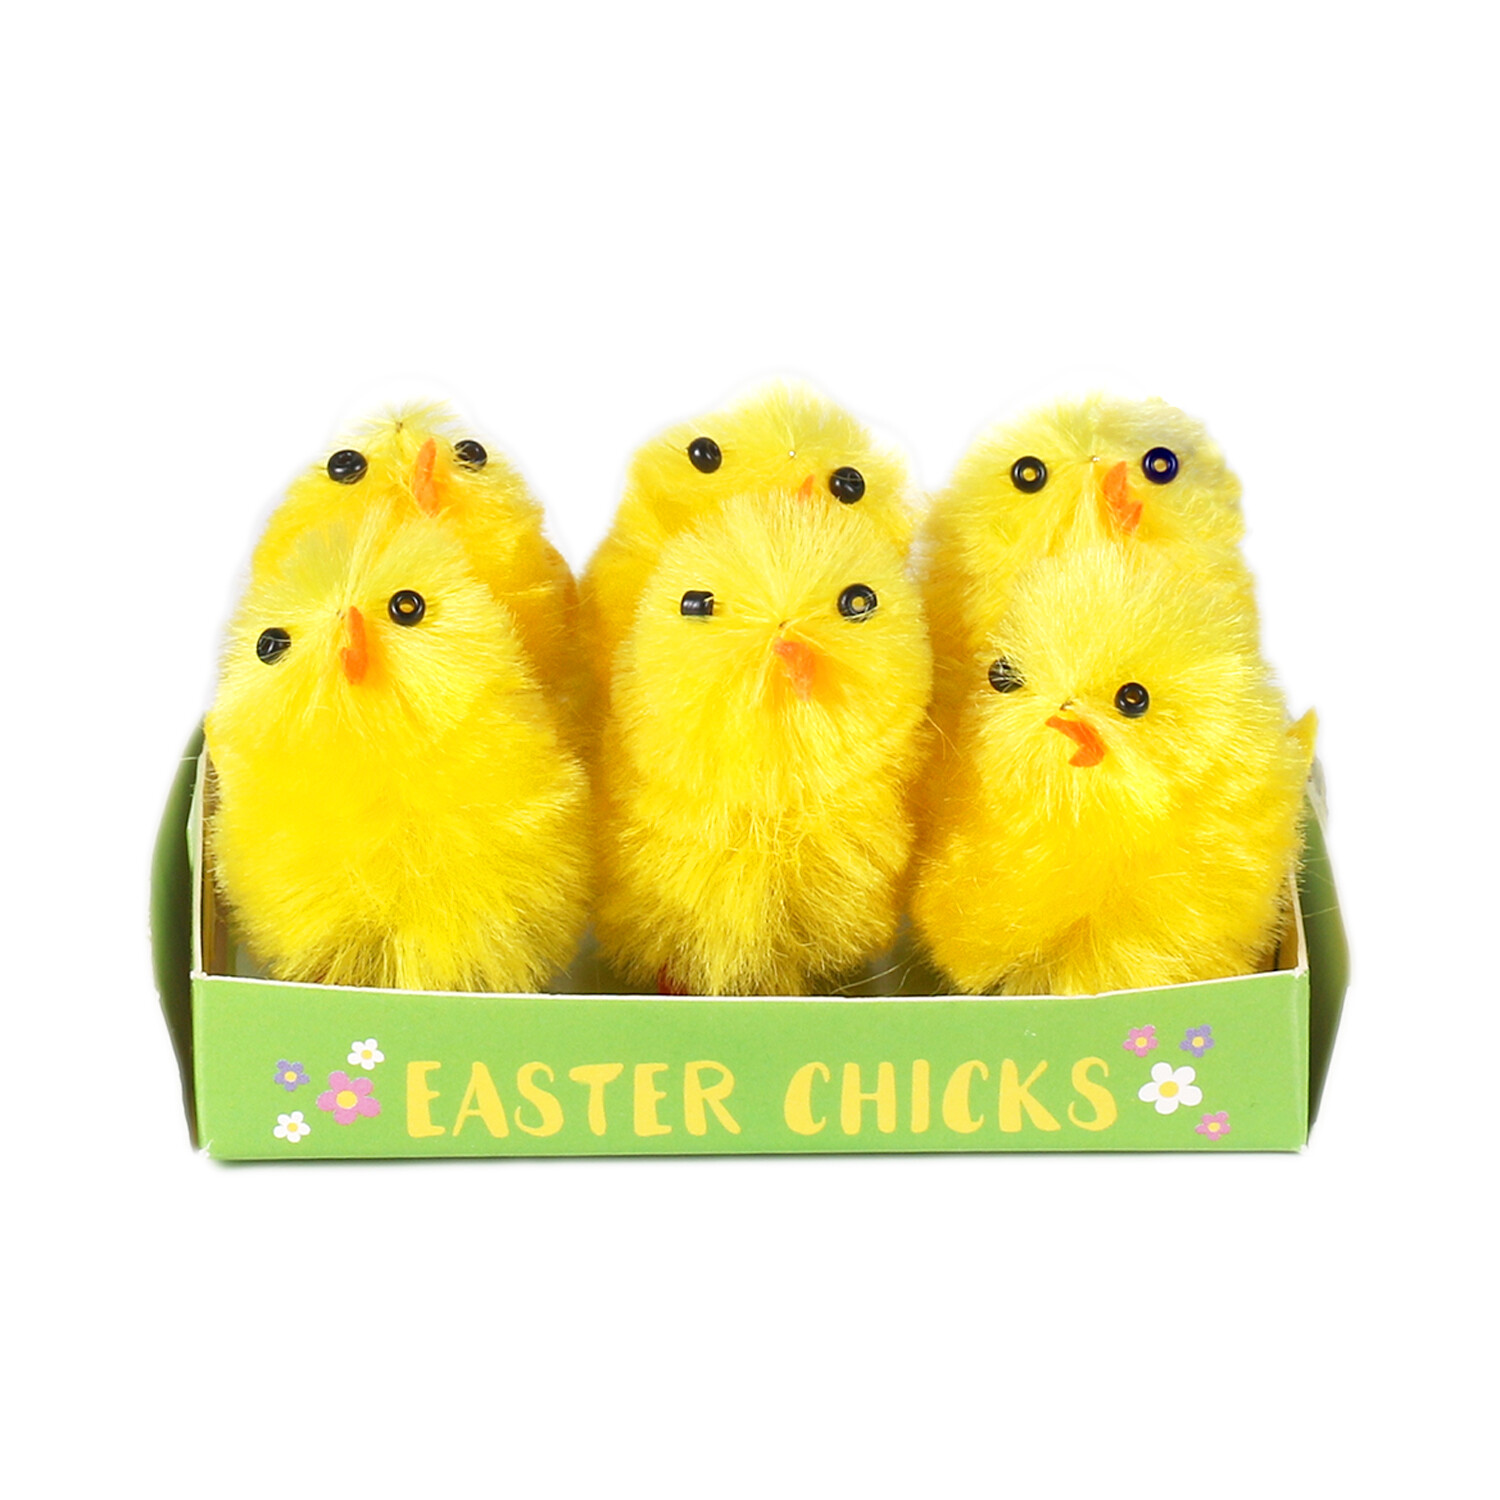 Easter Chick Decoration 6 Pack Image